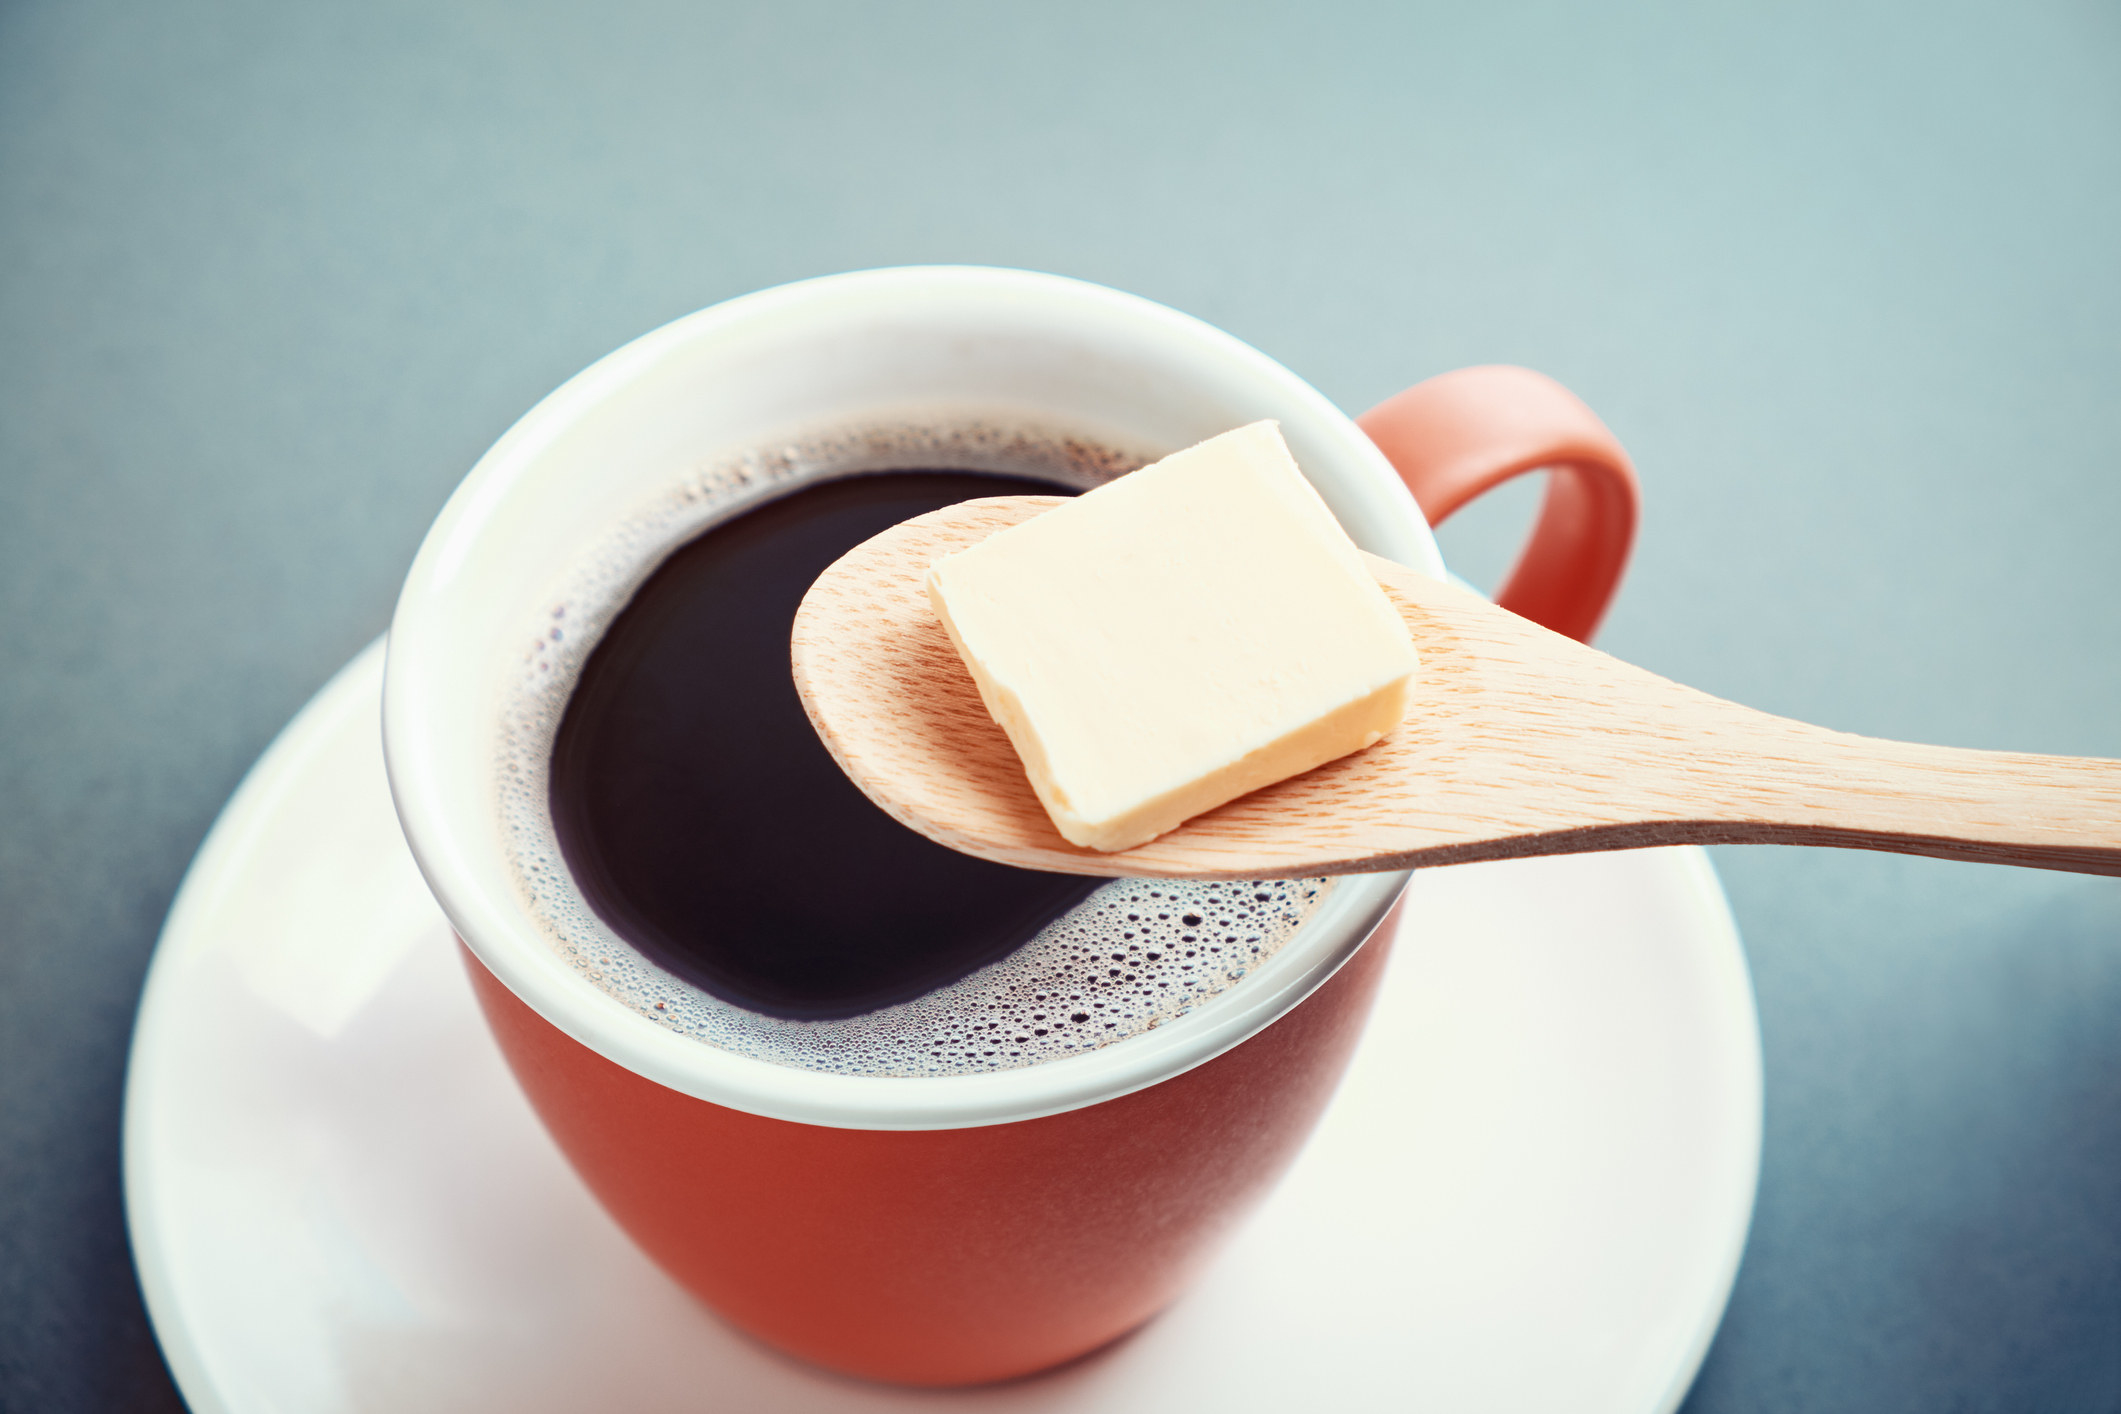 A pat of butter on top of a black cup of coffee